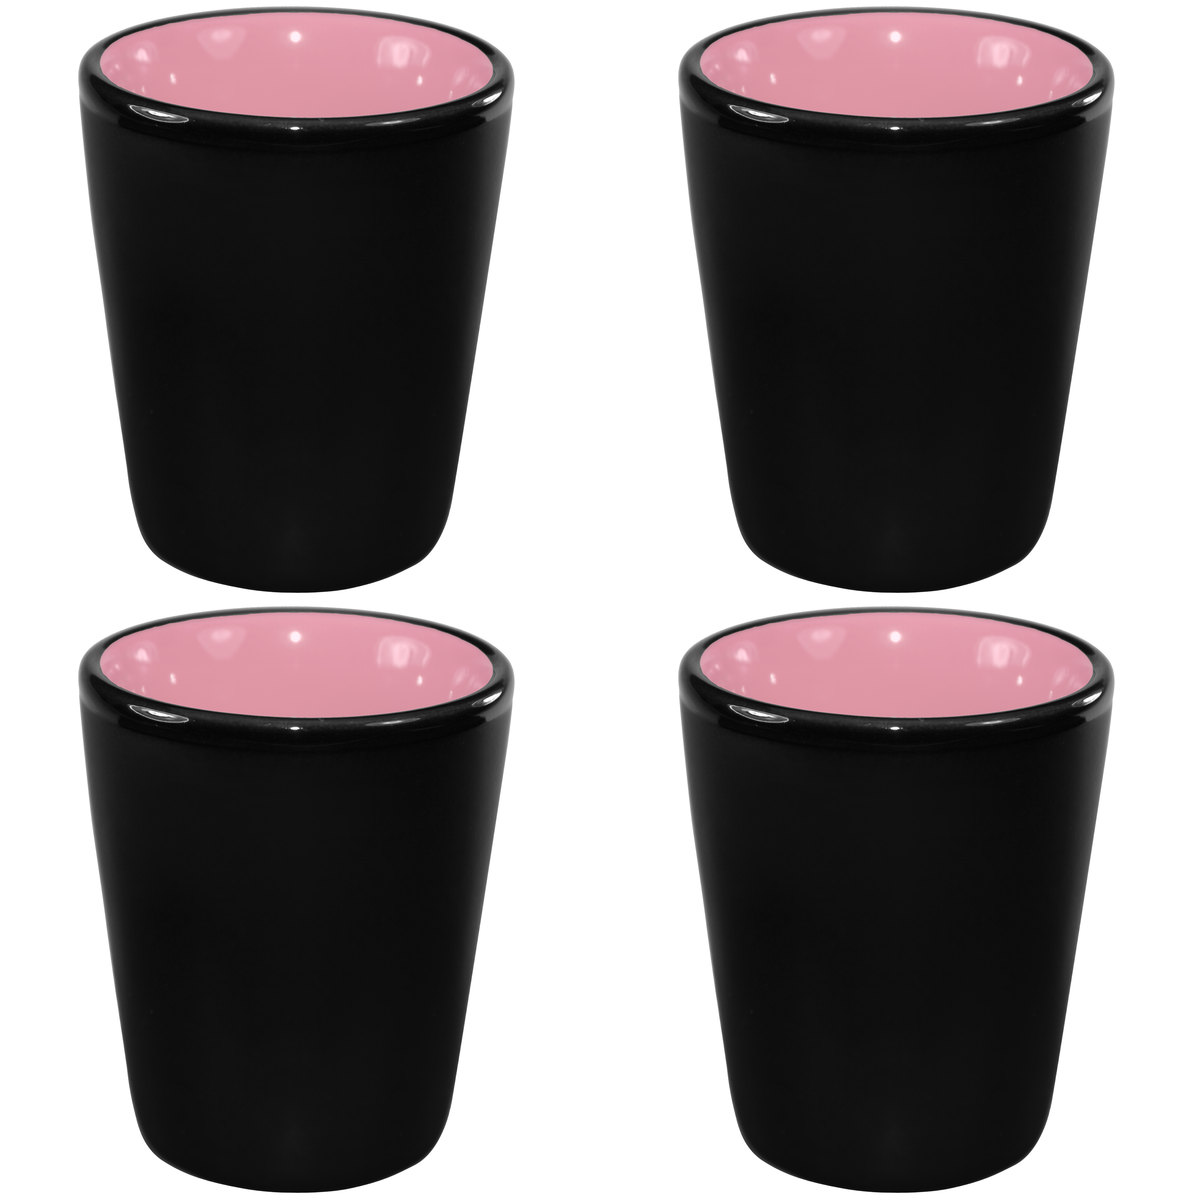 Pink-In Black-Out Stoneware Shot Glass 1.5 oz. ♡ Set of 4